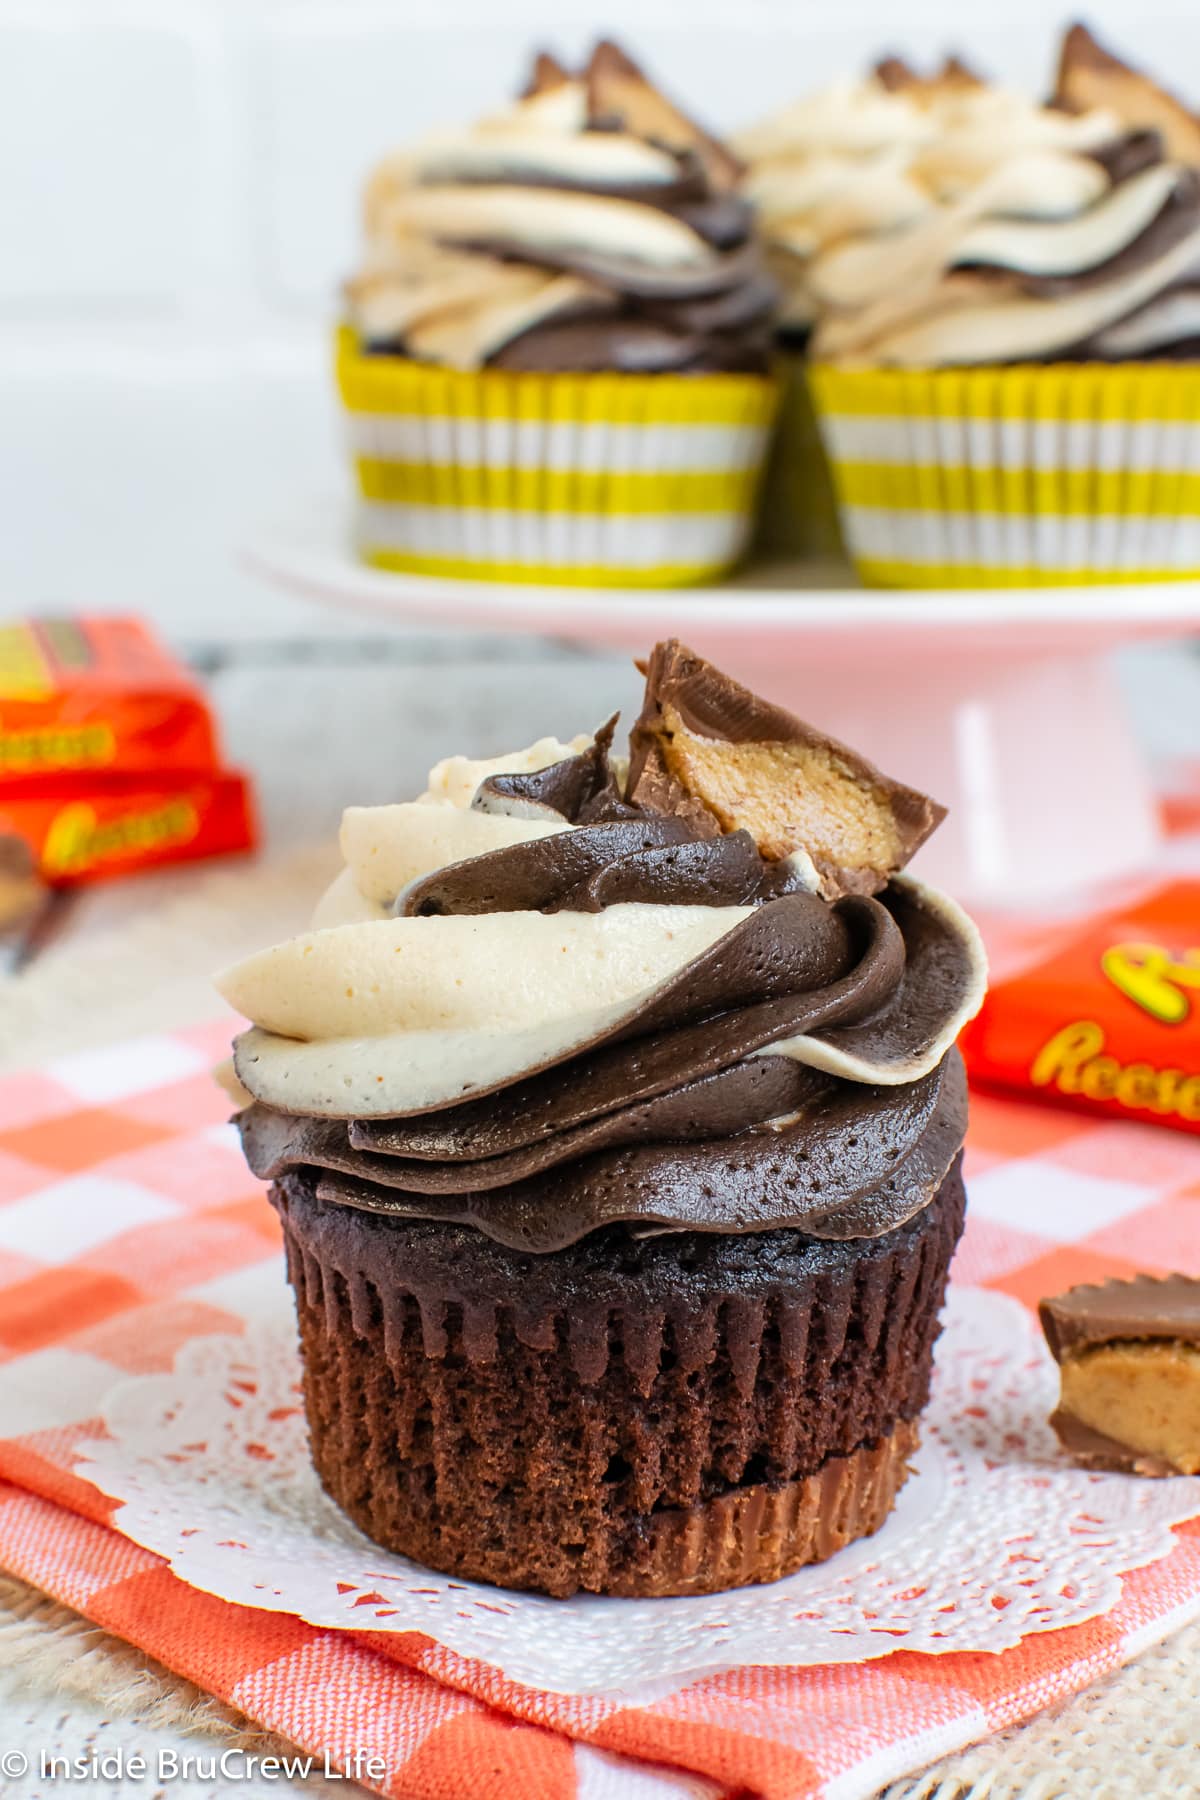 A chocolate cupcake with chocolate and peanut butter swirl frosting.